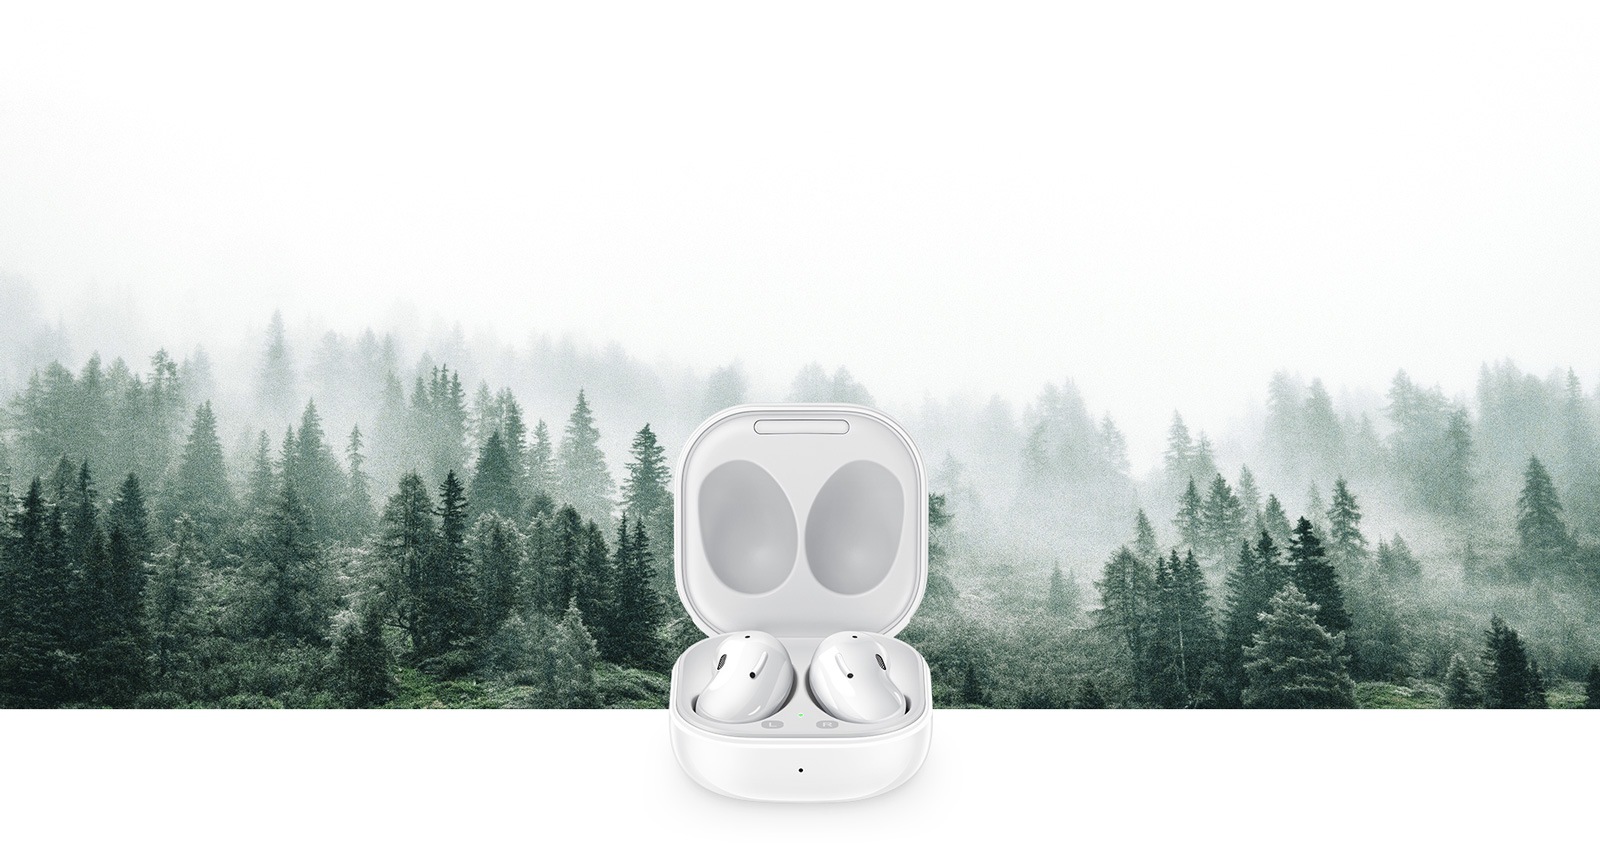 Galaxy Buds Live seen in open case in front of a forest.